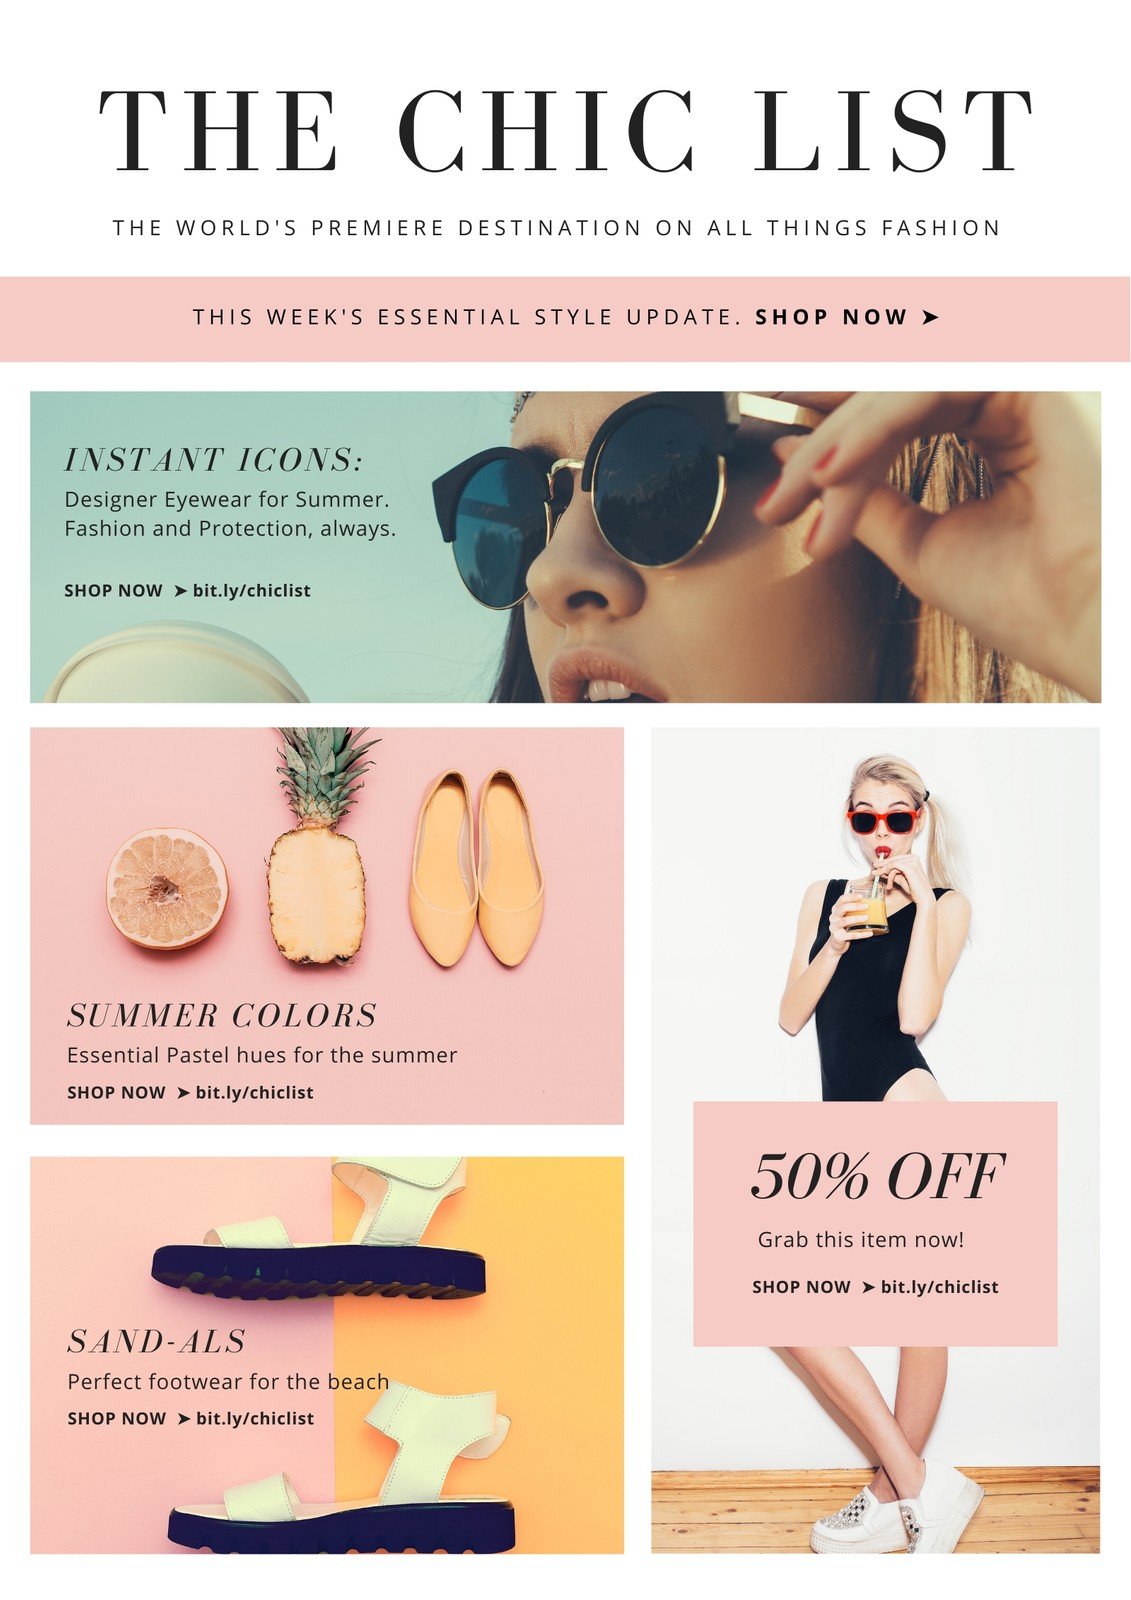 Pink Simple Fashion Newsletter Templates by Canva